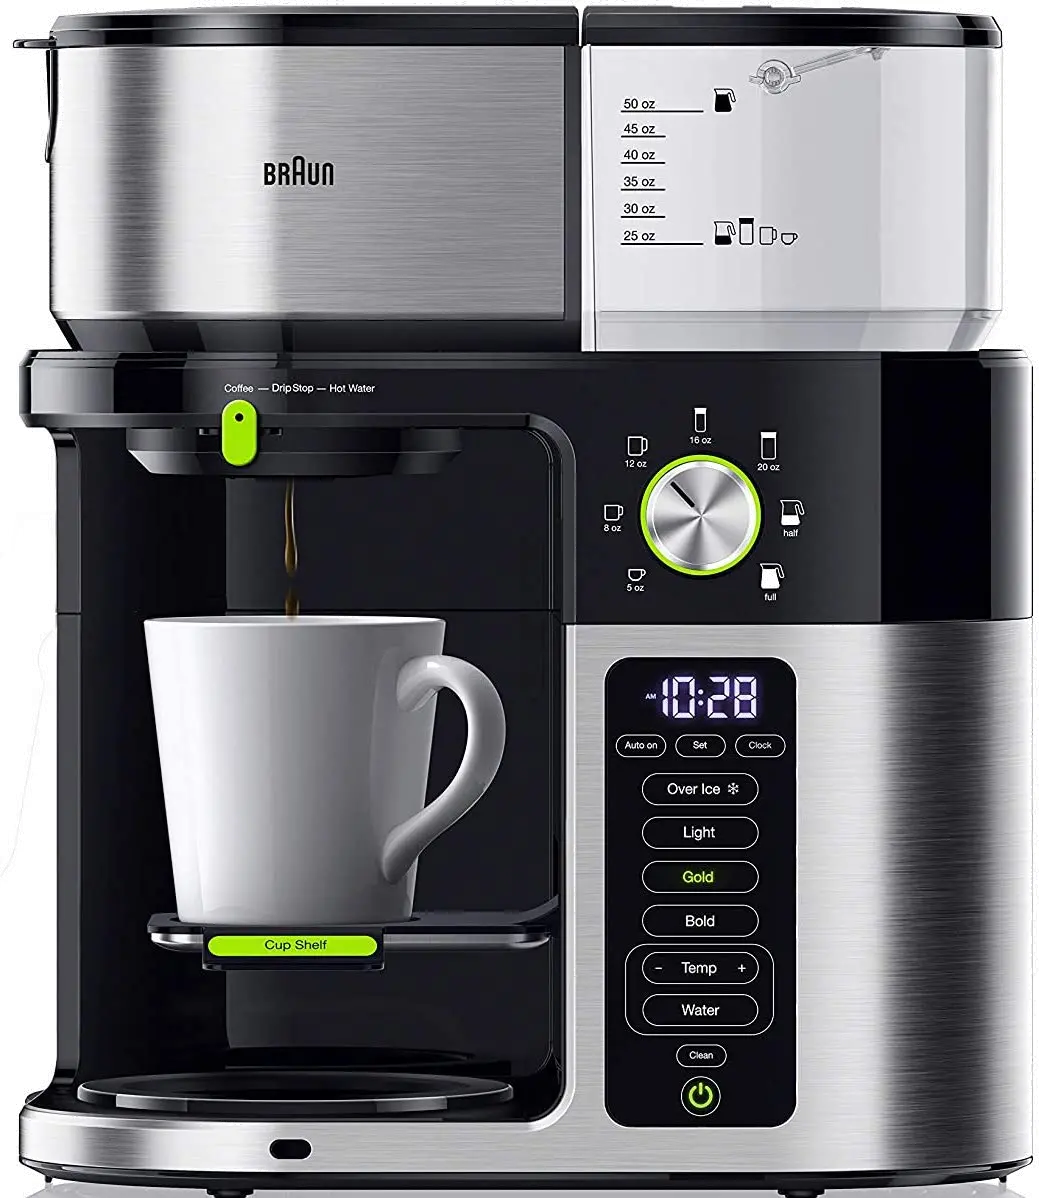 https://static.rcwilley.com/products/111900387/Braun-MultiServe-Drip-Coffee-Maker---Stainless-Steel-Black-rcwilley-image1.webp